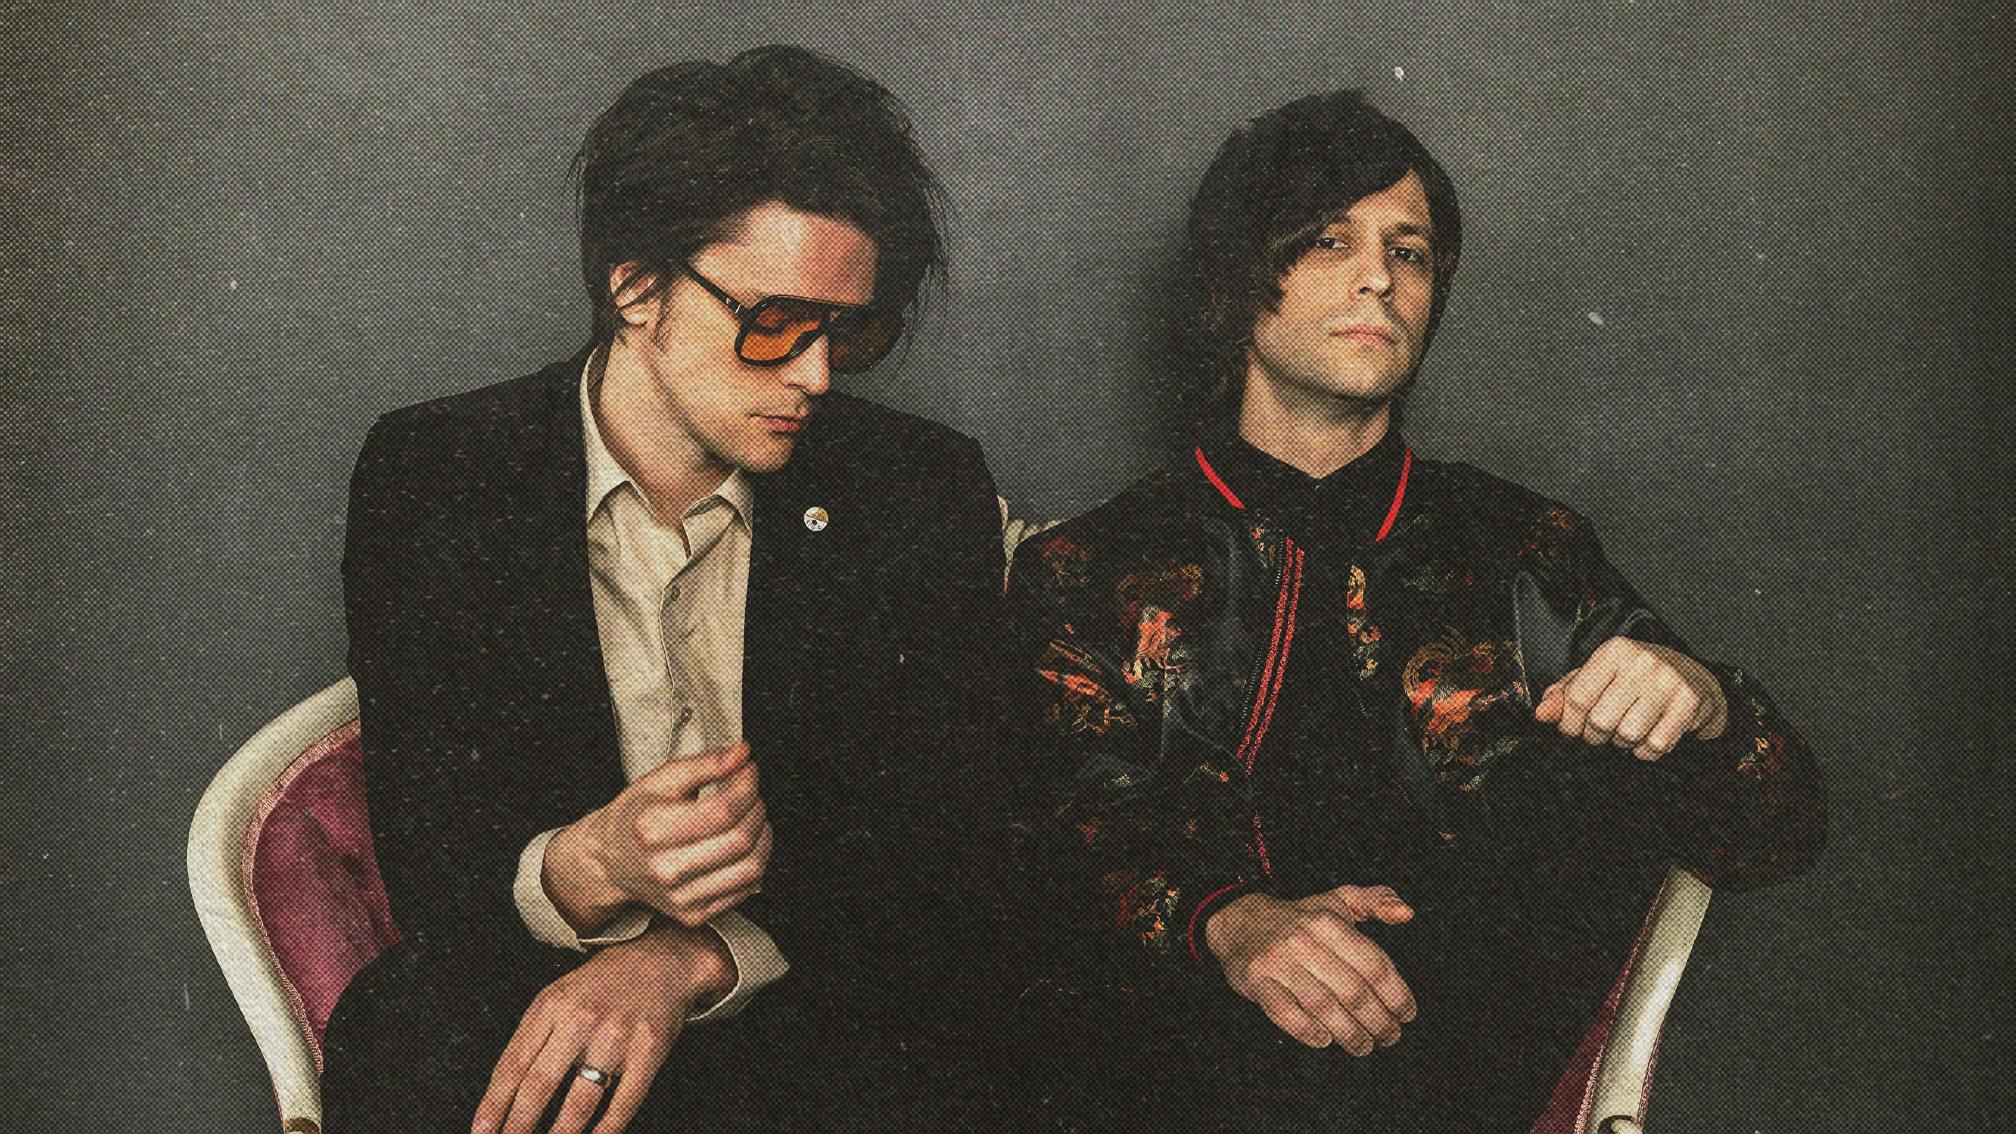 iDKHOW have announced their biggest-ever UK headline shows